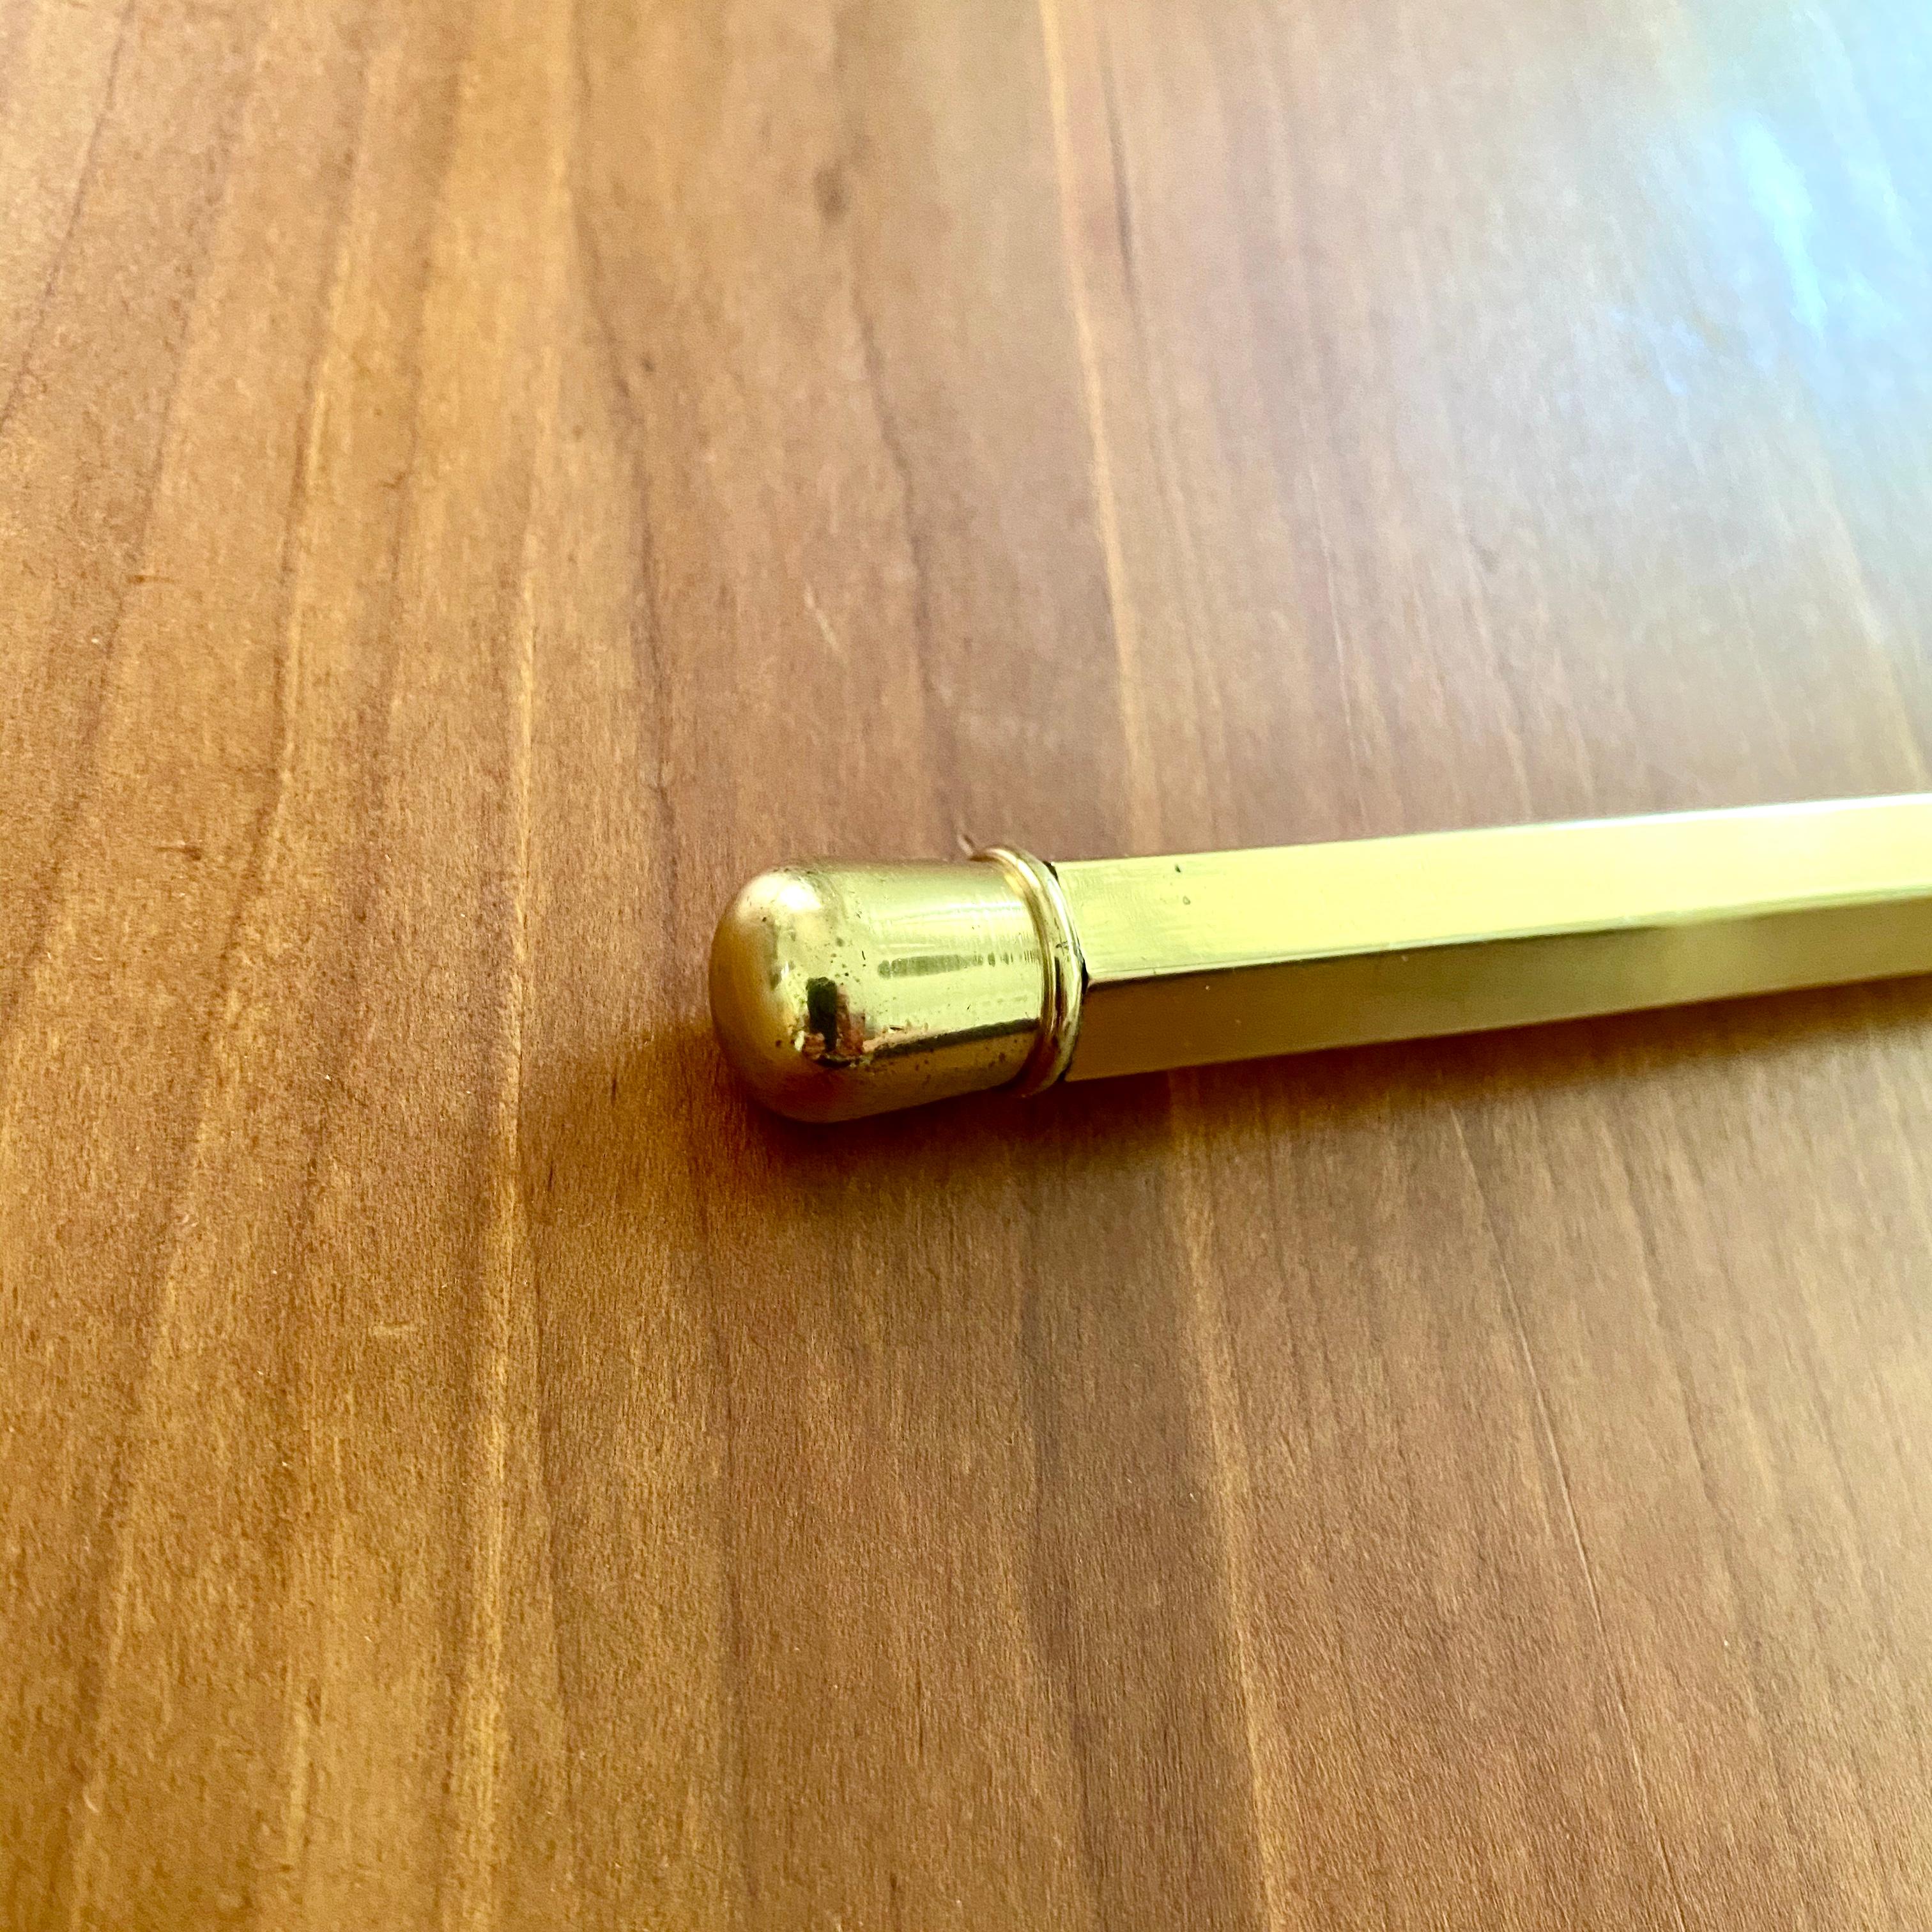 A vintage ink pen / rotary phone dialer / paper weight made of lacqered polished brass with an ink pen insert. The pen is model number 5037 and was designed by Carl Auböck of Werkstätte Carl Auböck in Austria. The pen is not signed, an original